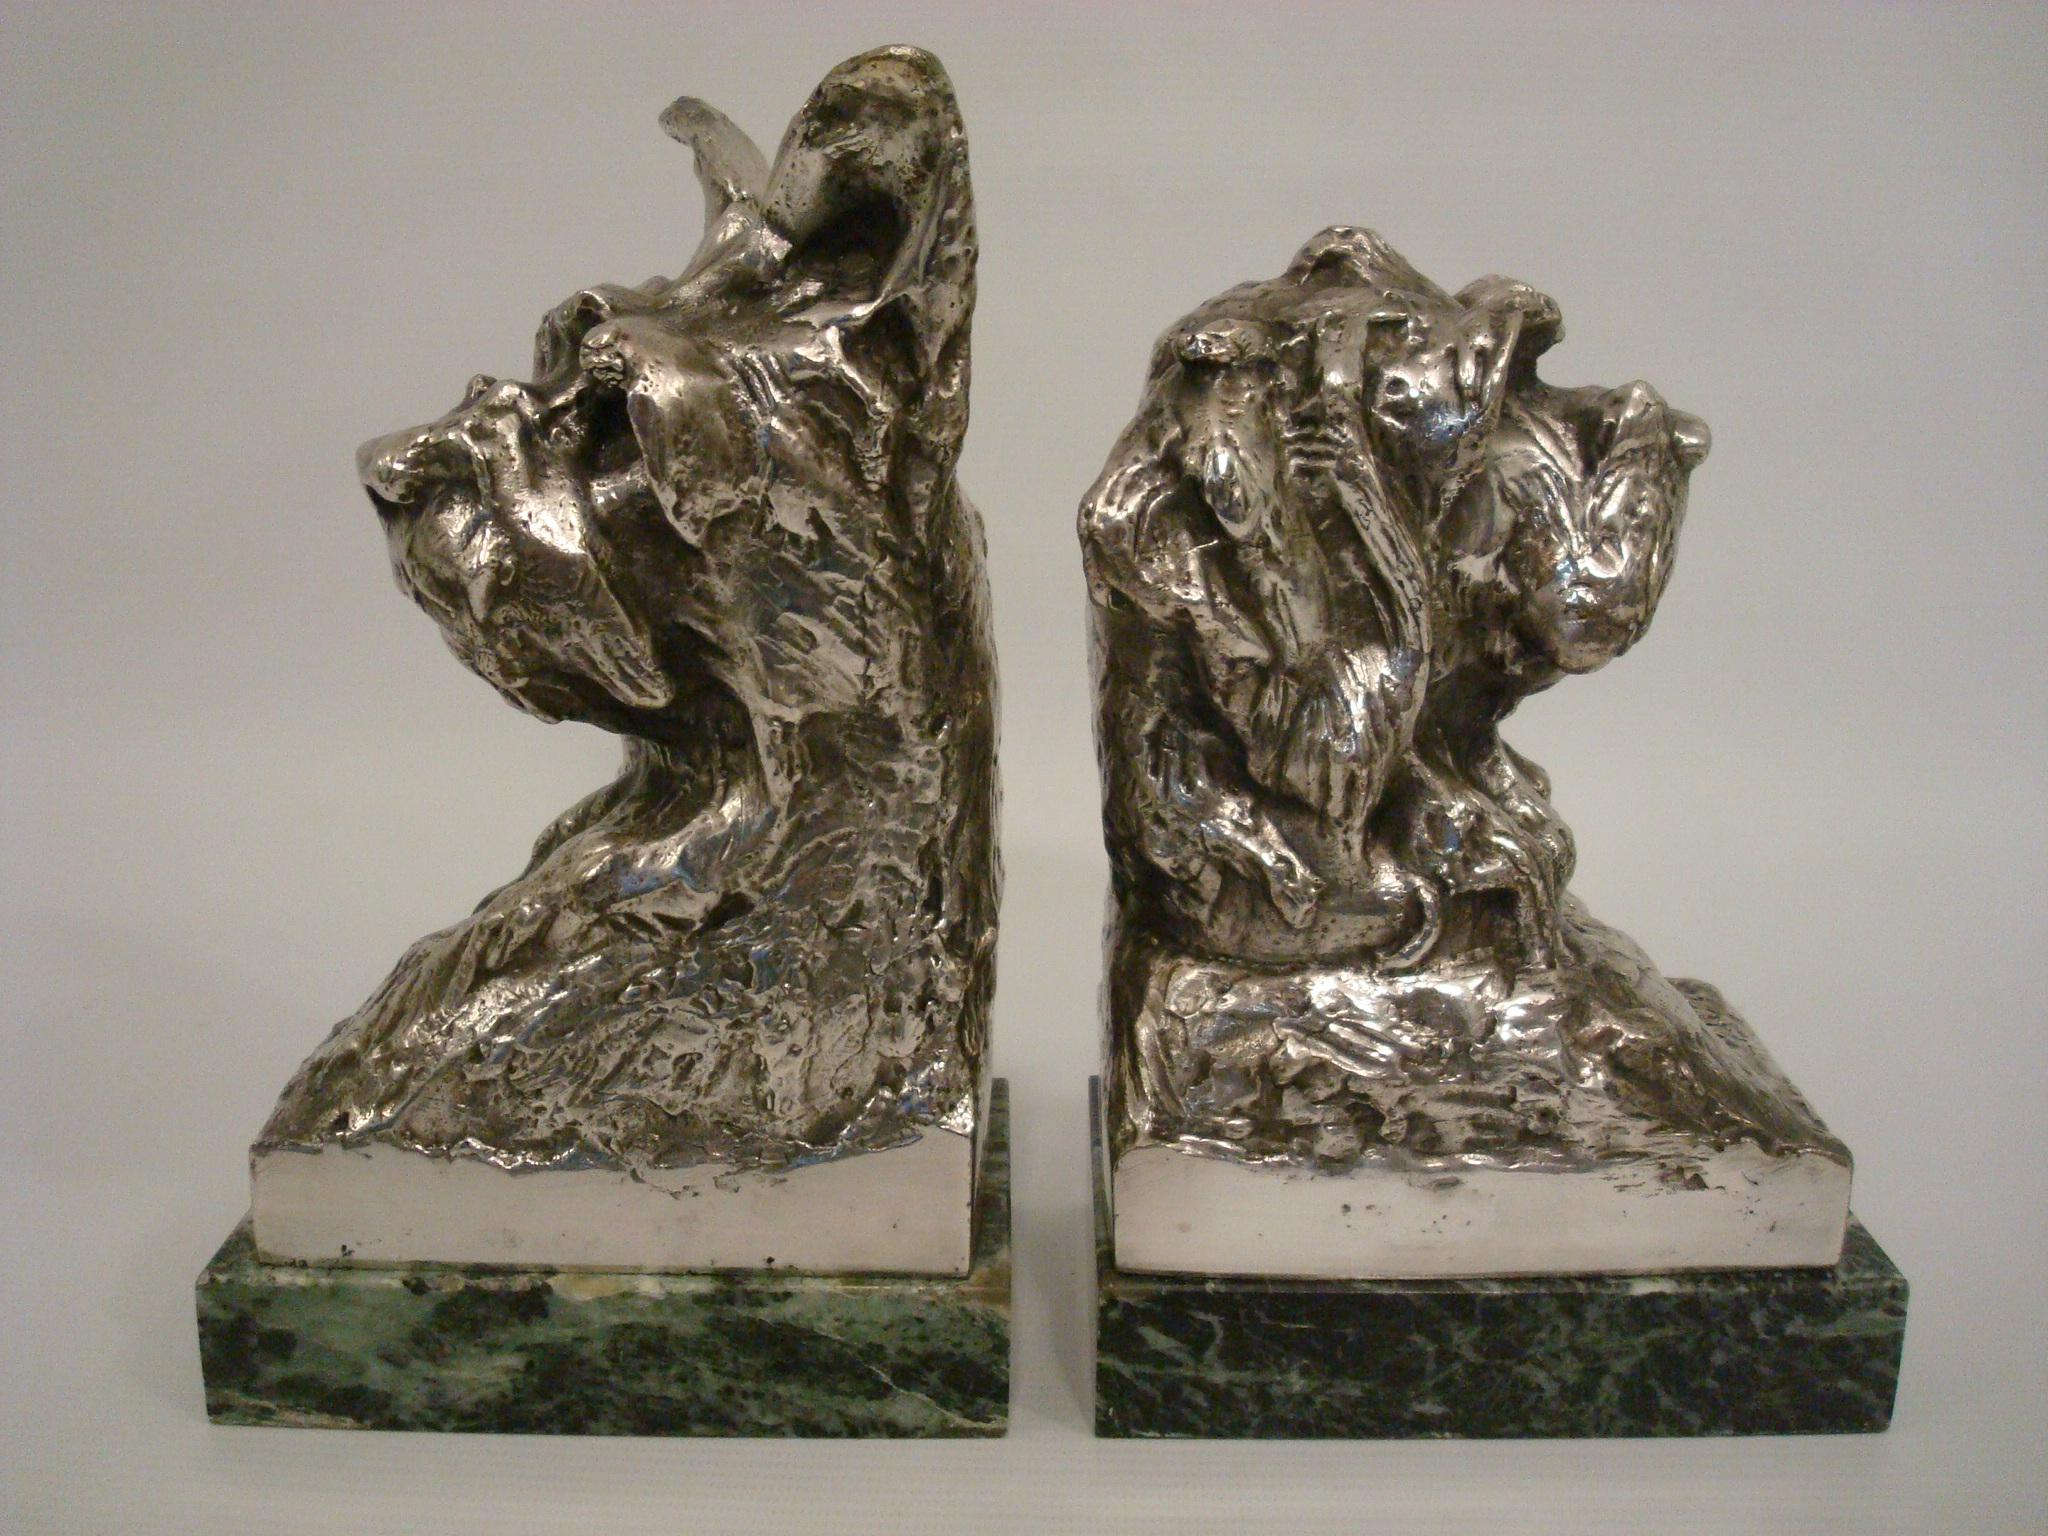 Art Deco West Highland Terrier Bookends by Maximilian Fiot, c. 1920.

A superb pair of bronze bookends depicting West Highland terriers in different poses, exquisitely cast using the cire perdue (lost wax) process, signed by the